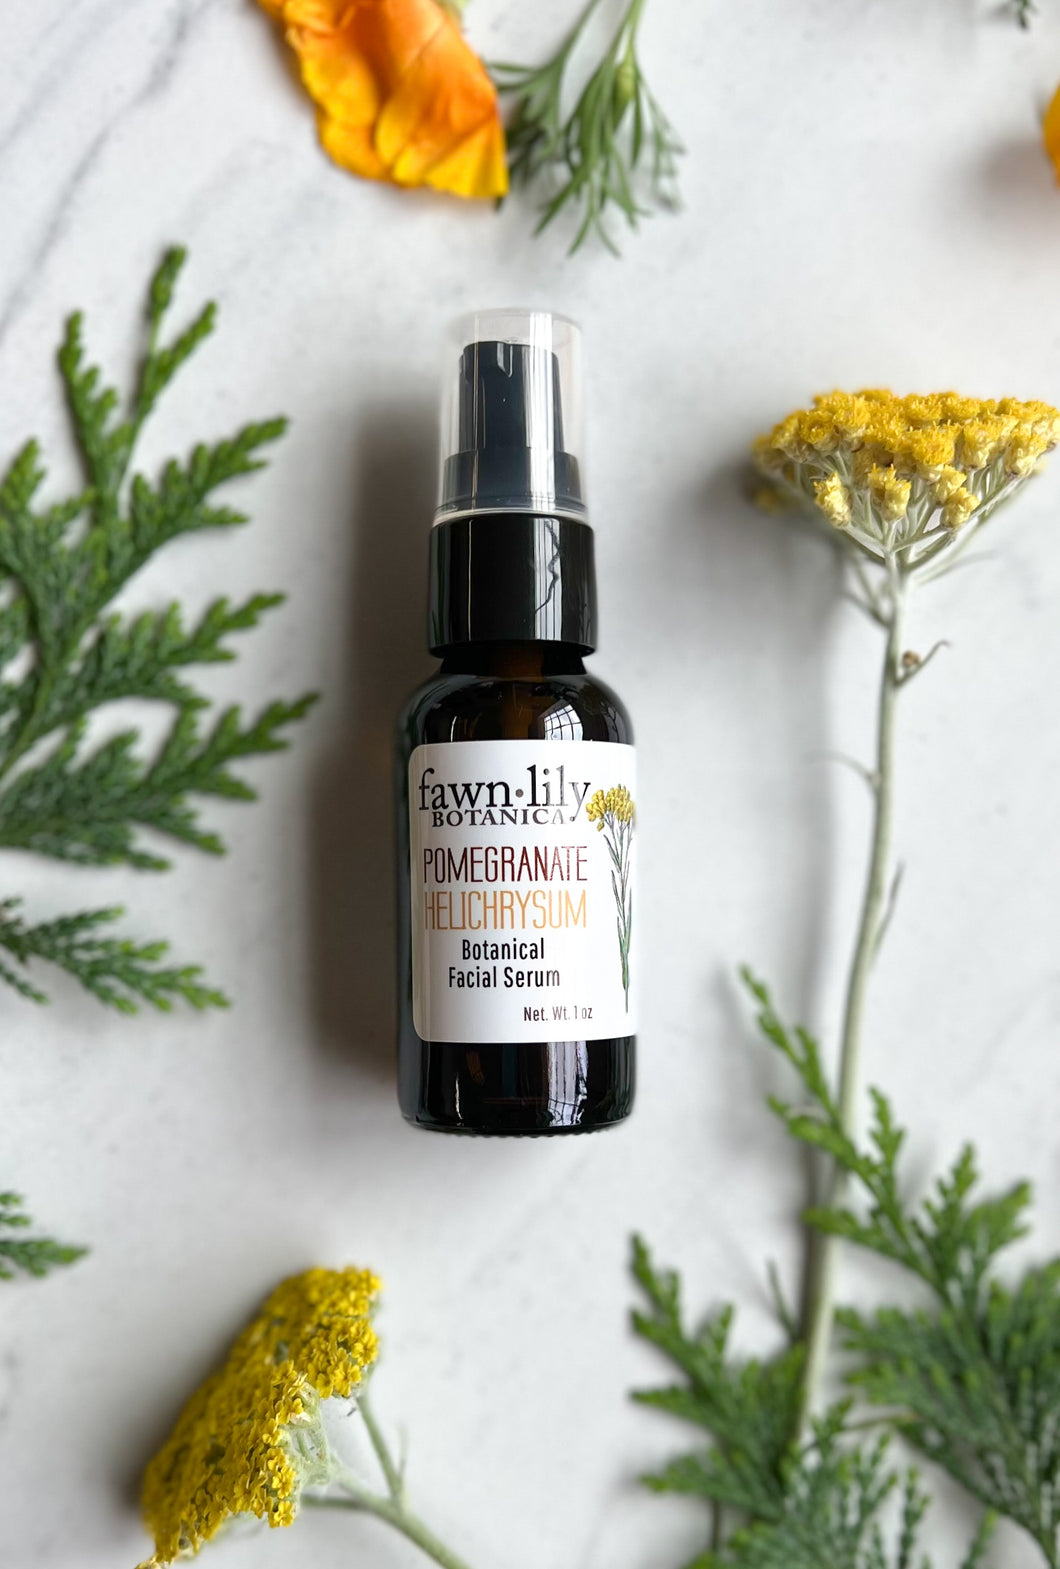 POMEGRANATE + HELICHRYSUM BOTANICAL FACIAL SERUM | Fawn Lily Botanica - A rich, concentrated facial oil designed to deeply moisturize, restore, and repair dry & mature skin. Made from organic, vegan plant-based ingredients